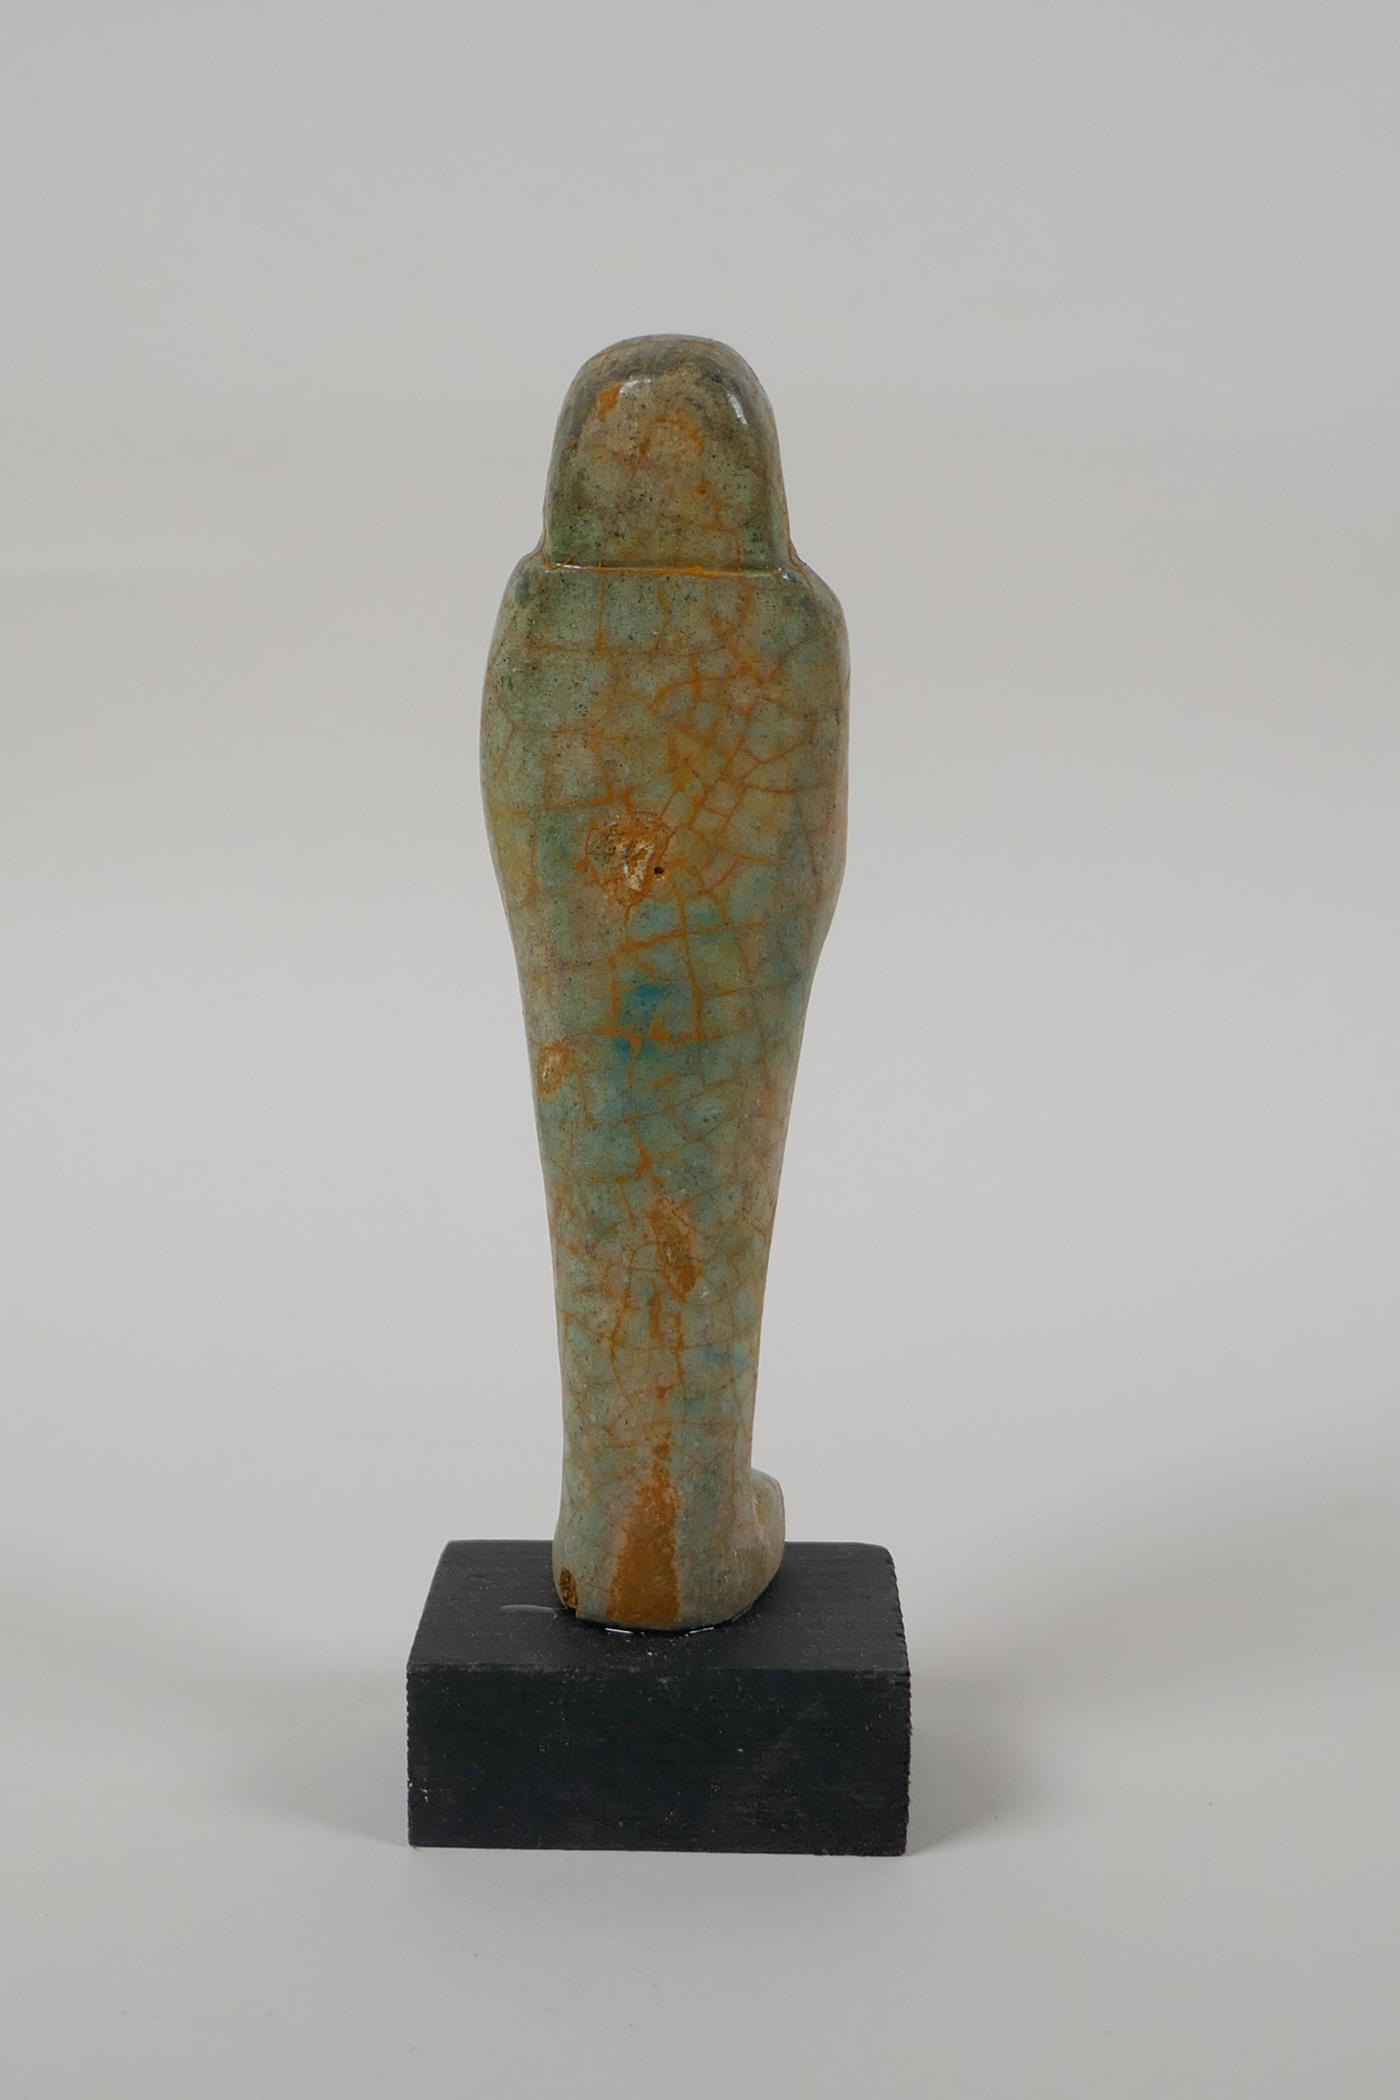 An Egyptian turquoise glazed faience shabti, mounted on a display base, 6" high - Image 3 of 4